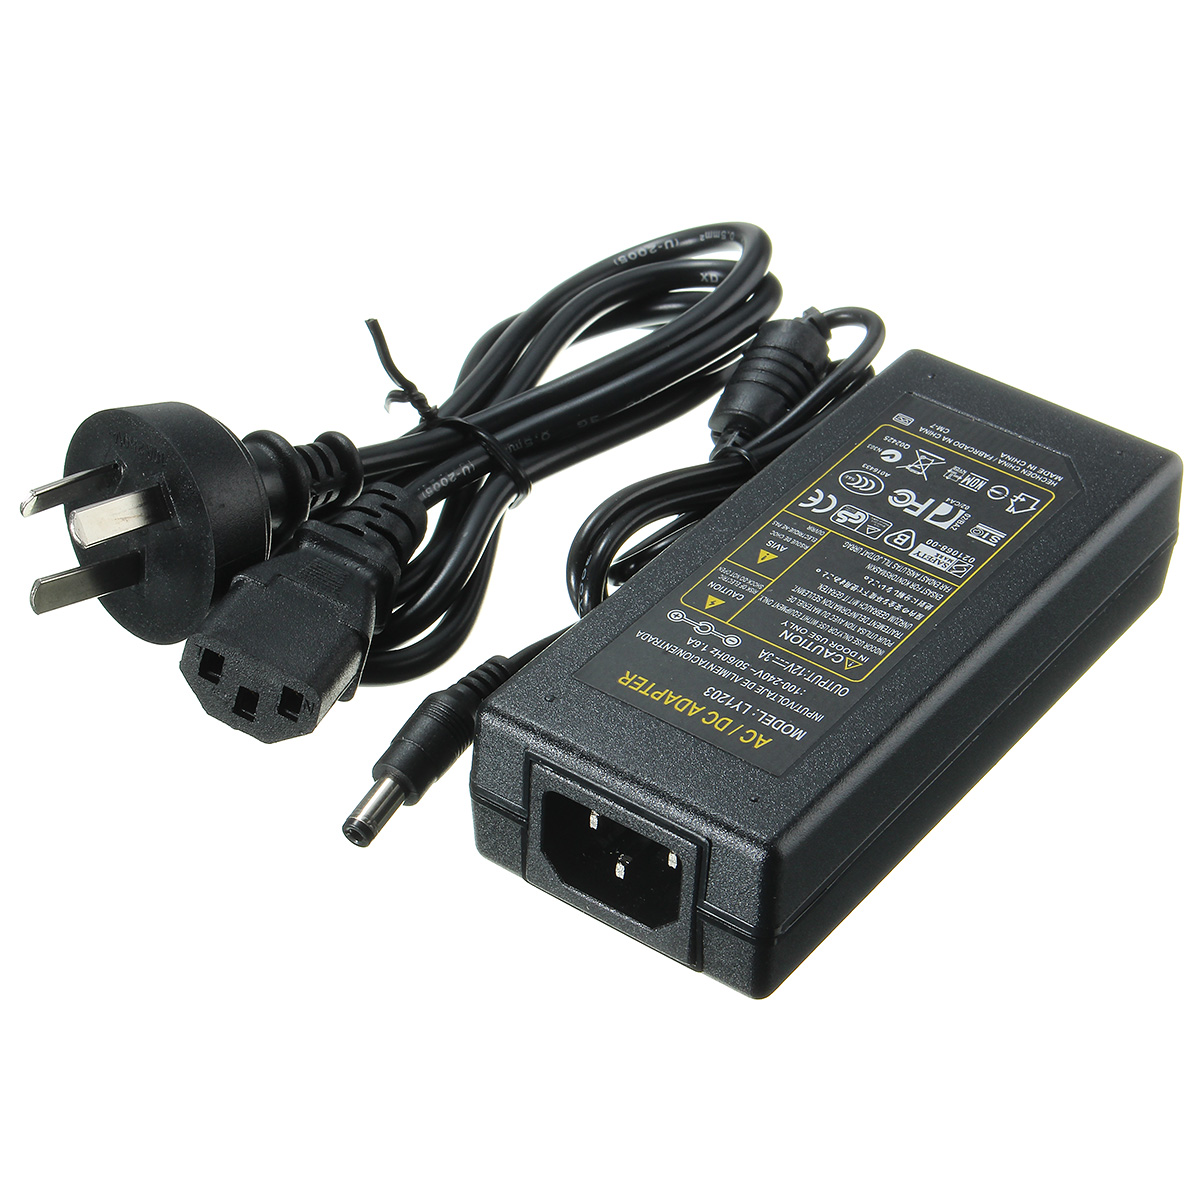 AC-100-240V-to-DC-12V-3A-36W-Power-Supply-Adapter-for-LED-Strip-86979-6